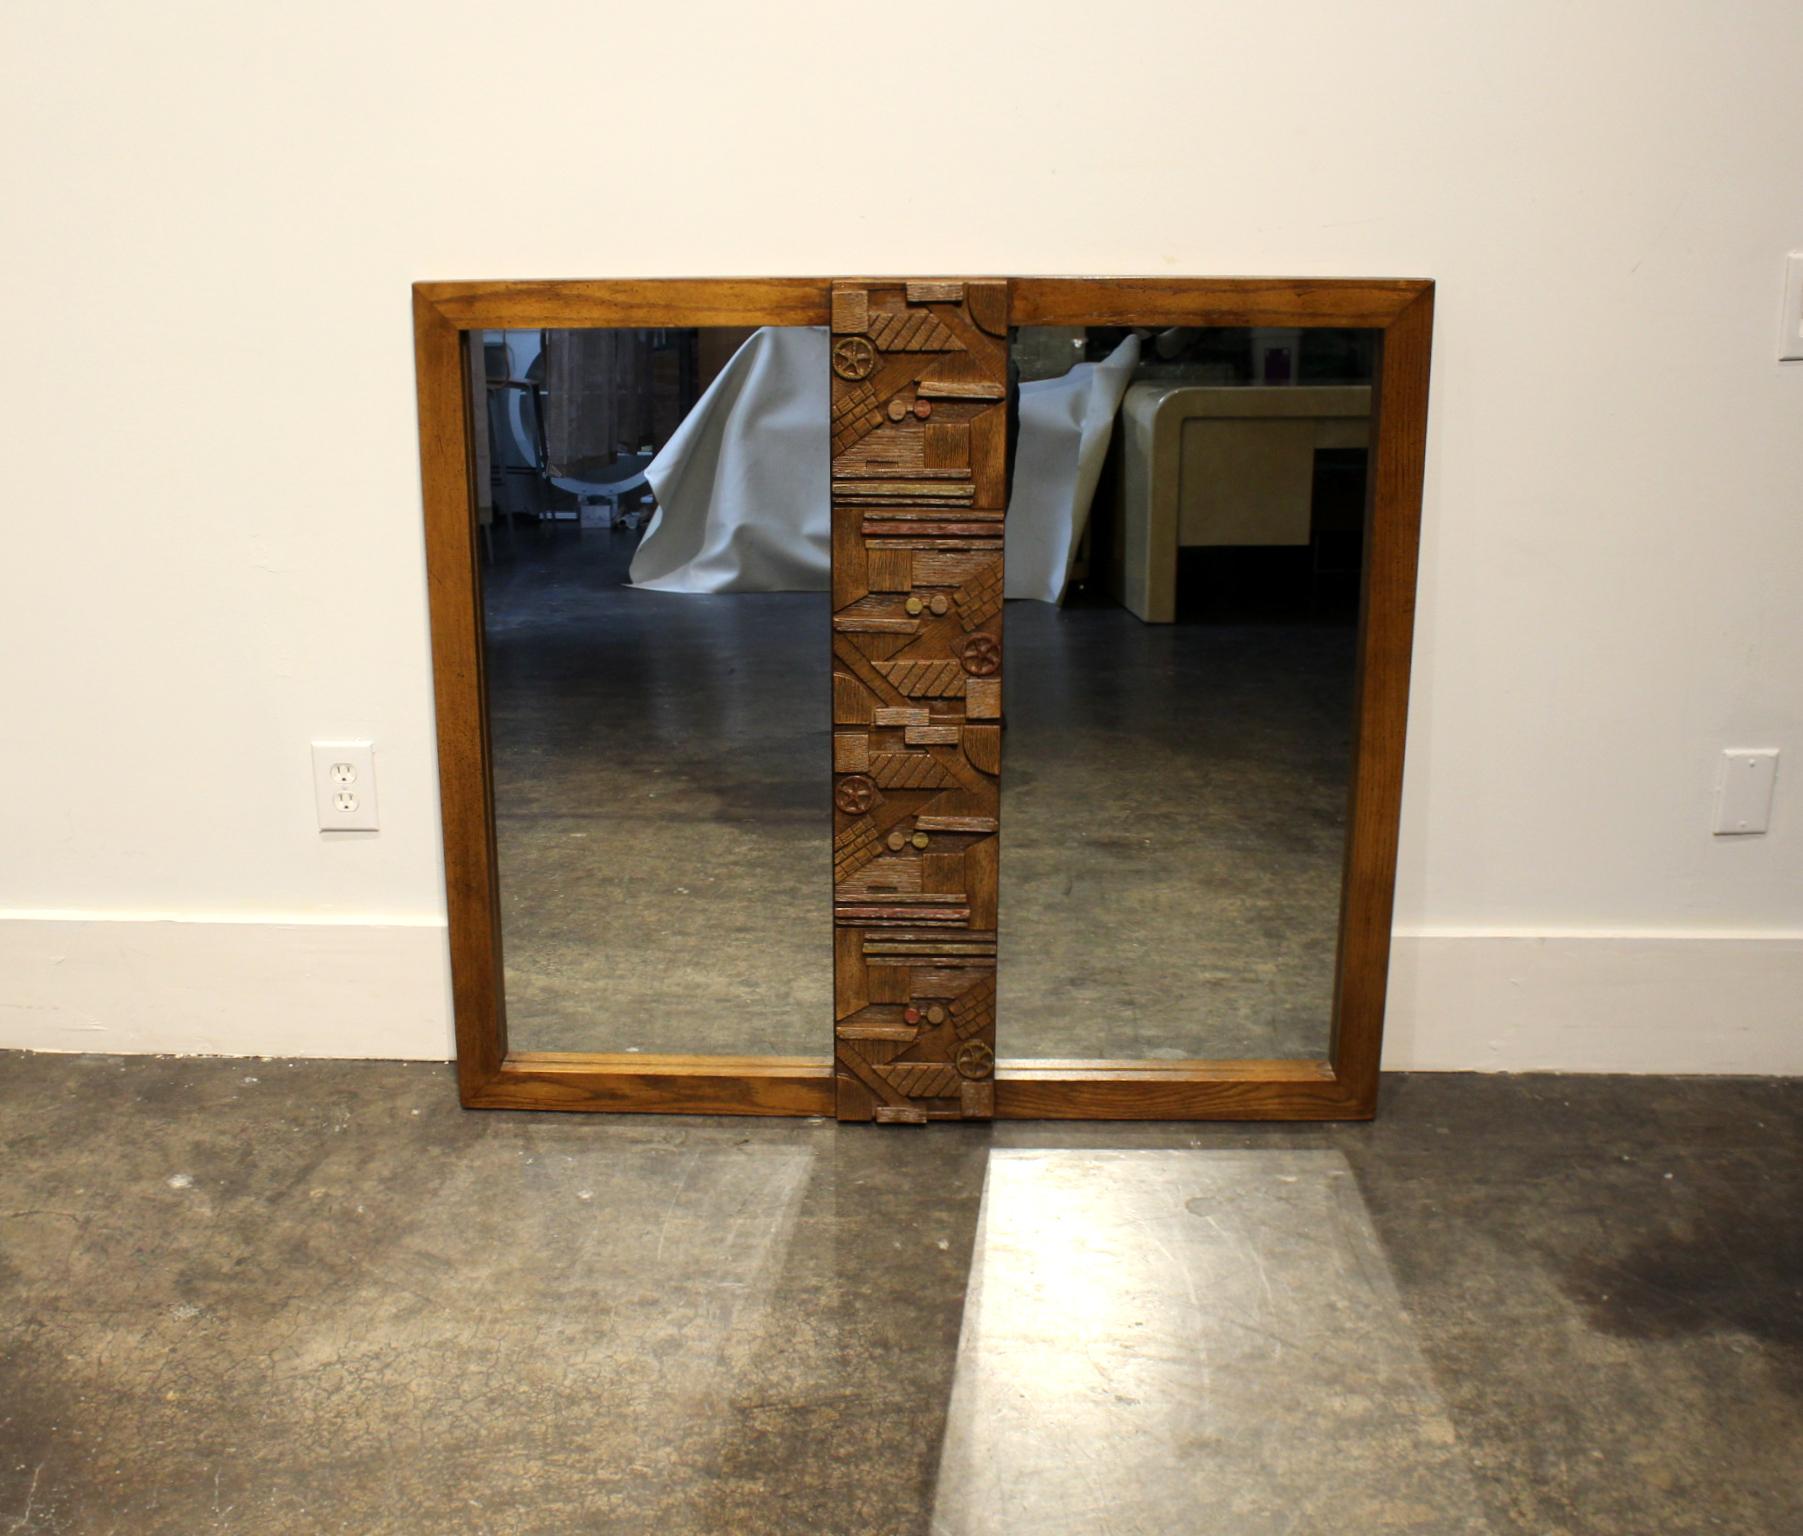 Dresser mirror from one of Lane Furniture's Classic 1970s Brutalist bedroom sets. Warm walnut wood with rough-hewn mosaic pattern in center, subtle painted highlights. Two 17 x 37